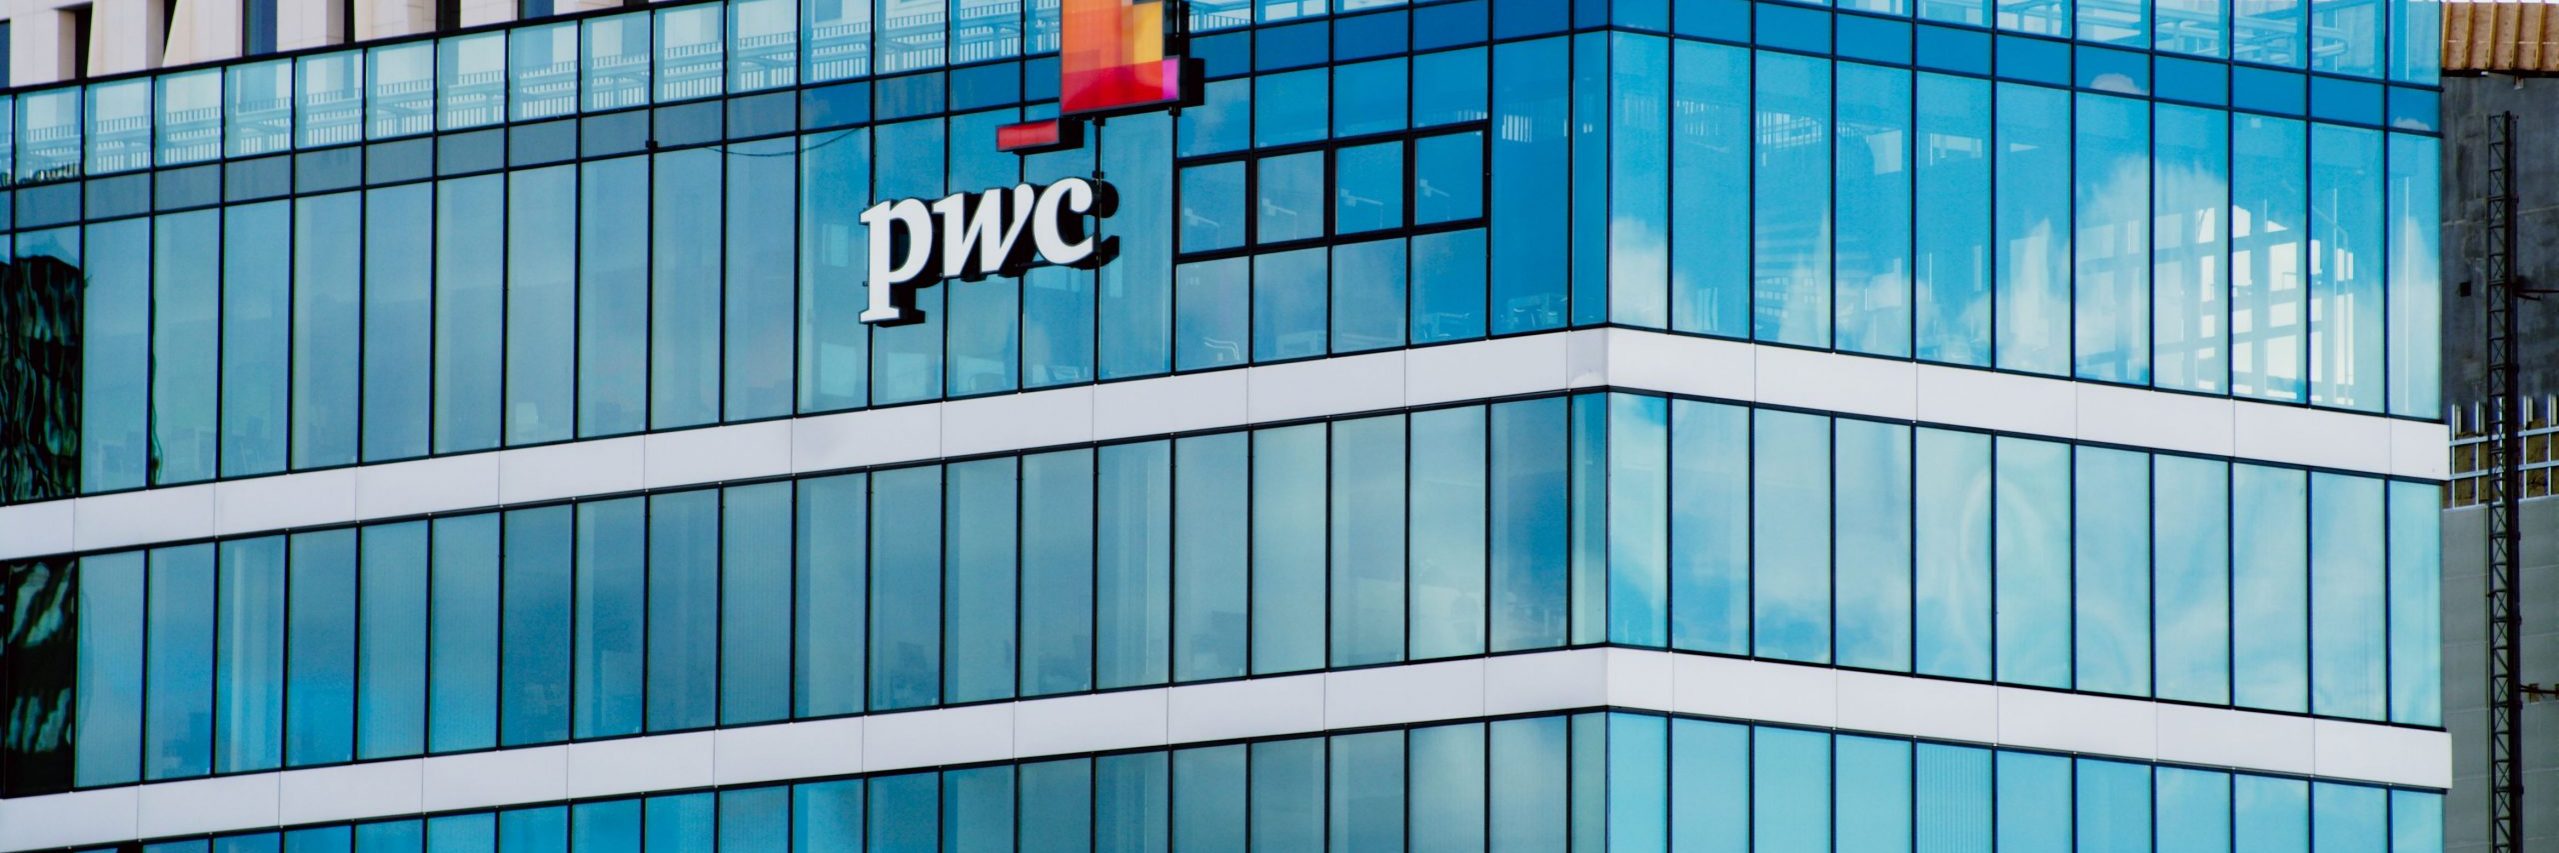 PWC came under fire after it was found to have leaked confidential tax information to its partners.